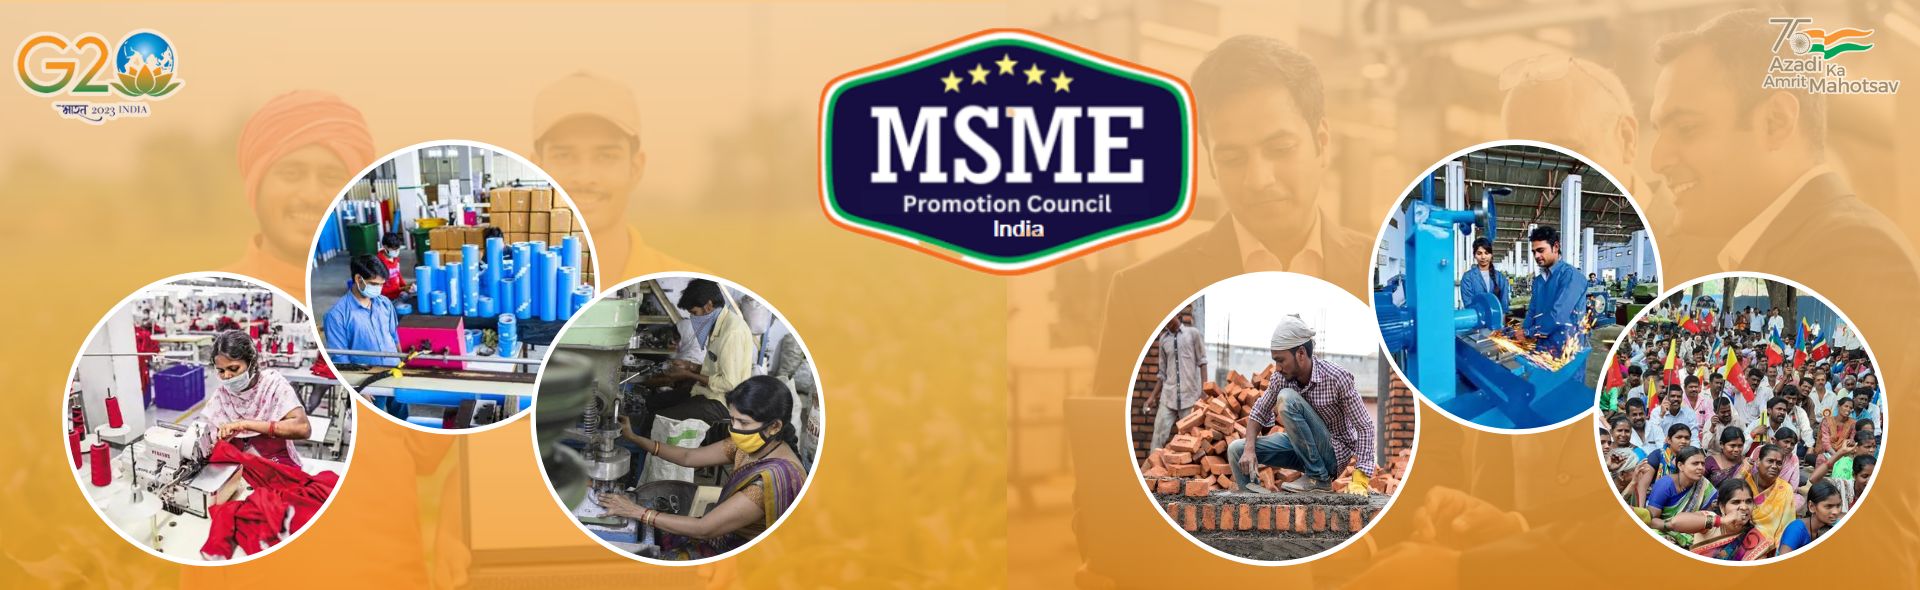 Government of Belize Announces the MSME Support Program - The San Pedro Sun